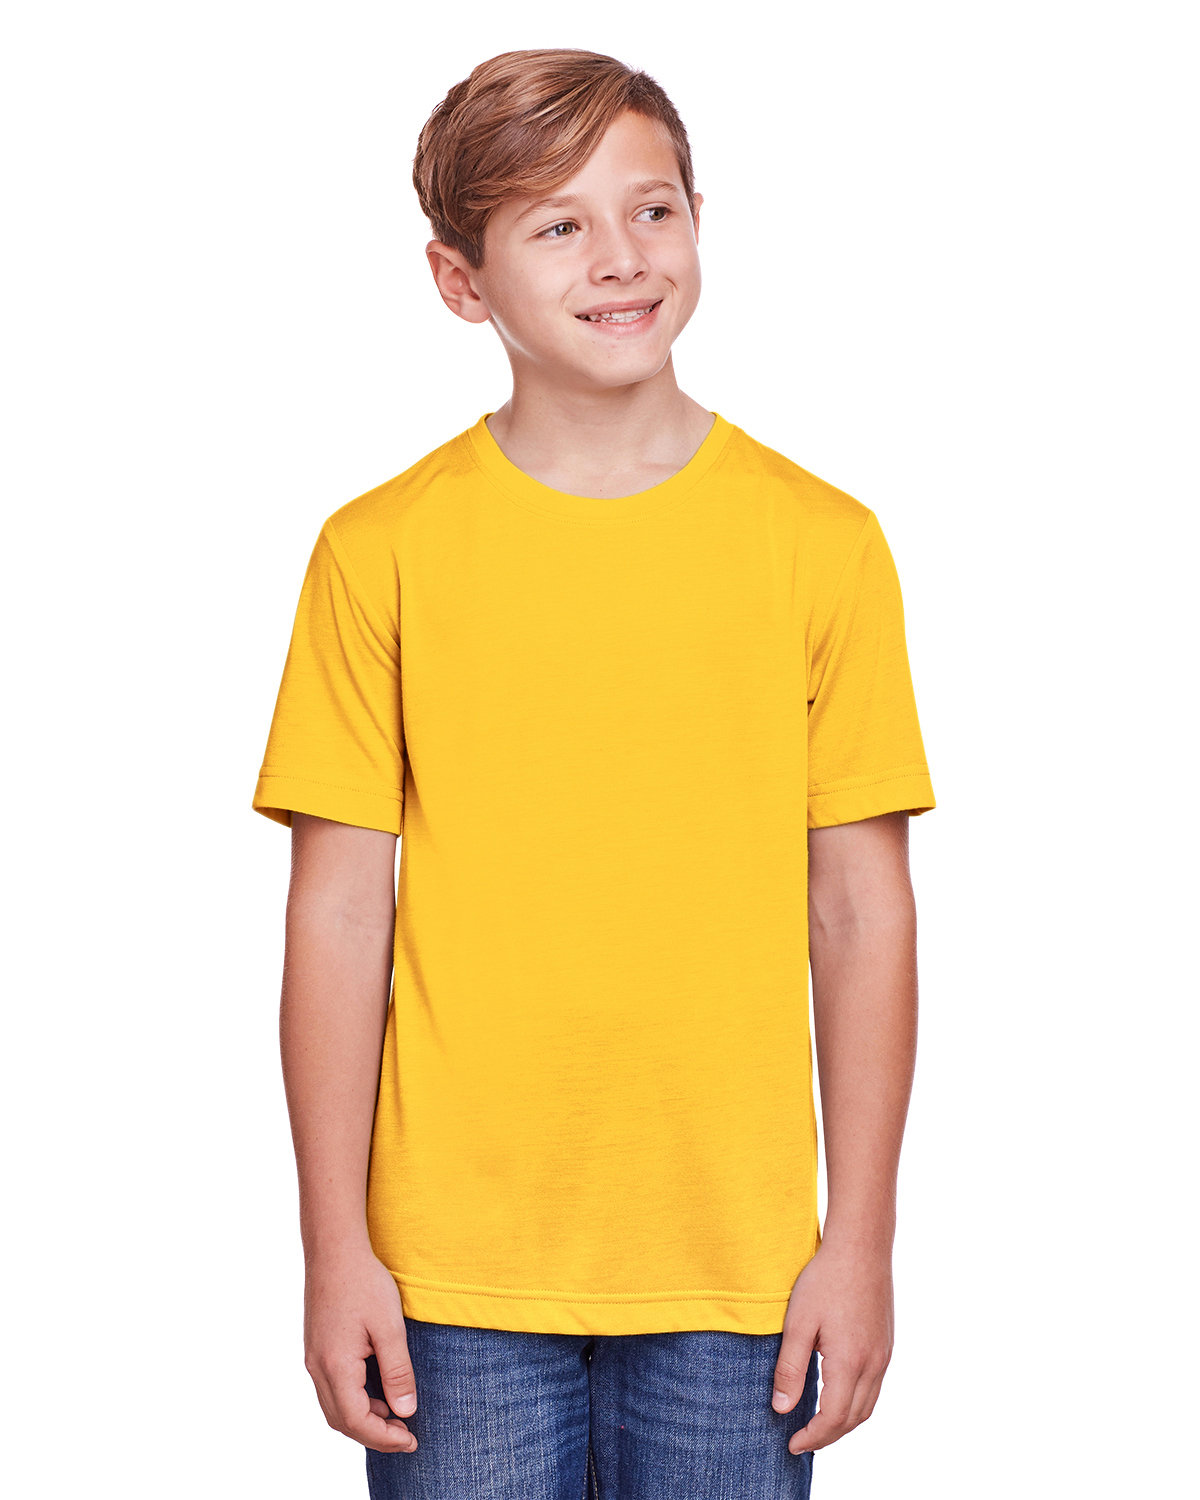 Core 365 Youth Fusion ChromaSoft Performance T-Shirt CAMPUS GOLD 